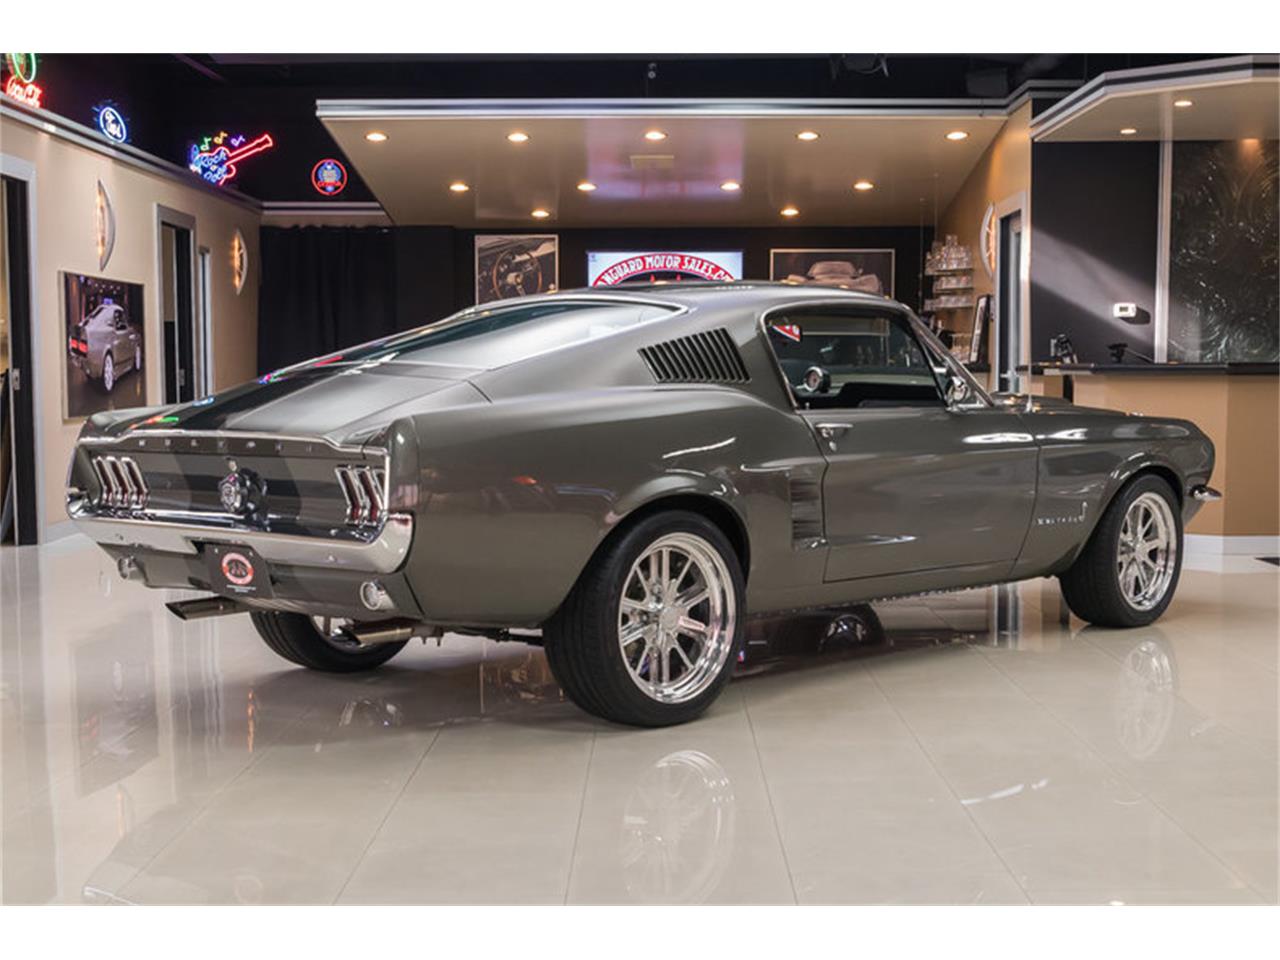 1967 Ford Mustang Fastback Restomod for Sale | ClassicCars ...